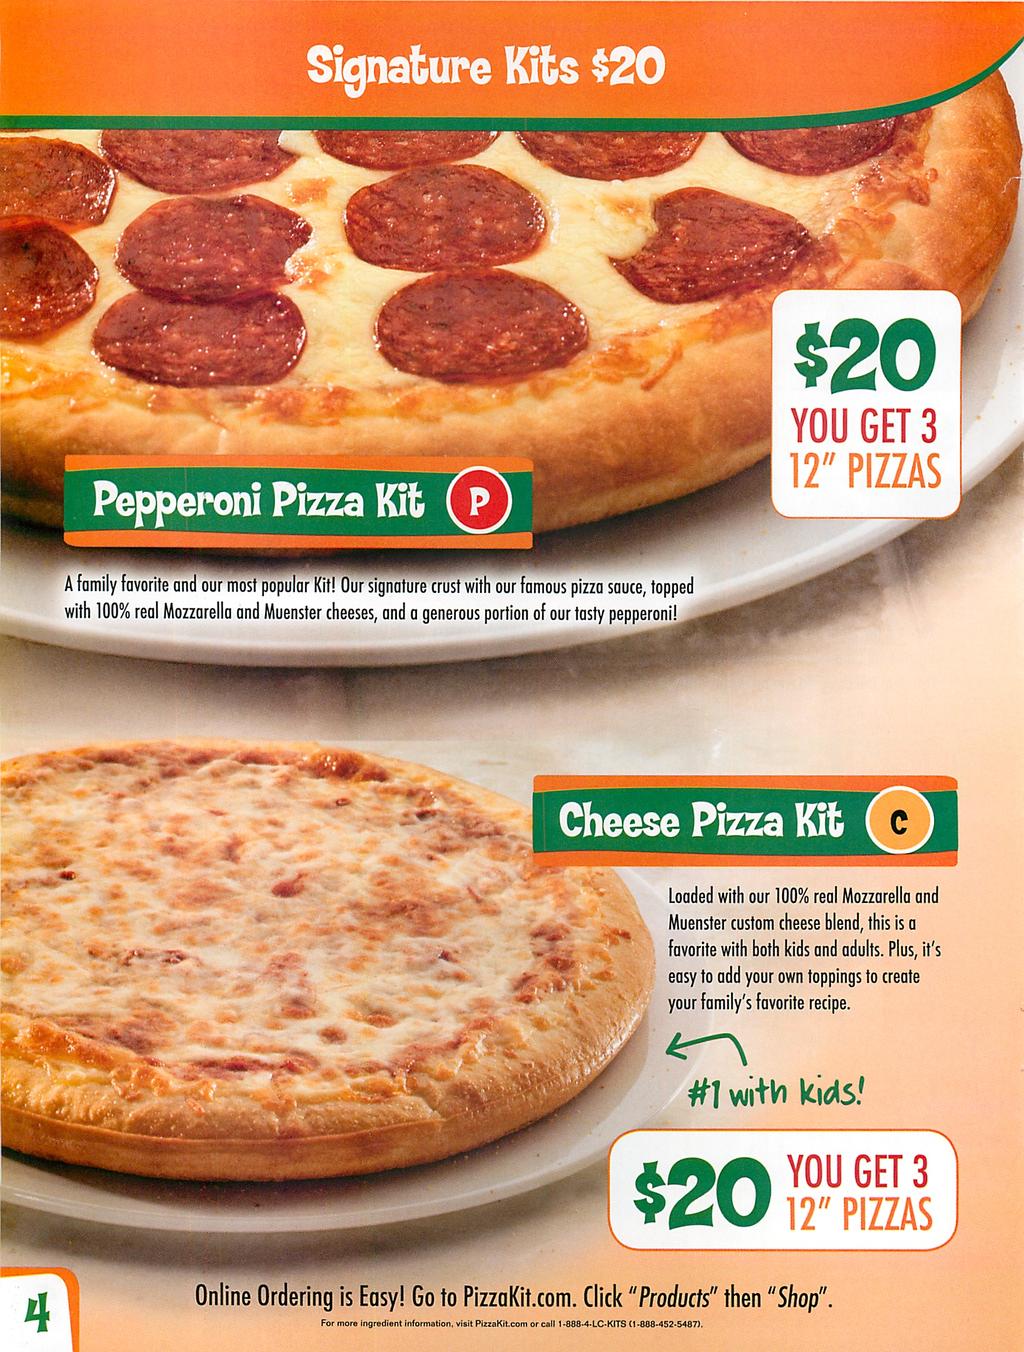 YOU GET 3 12" PIZZAS epperoni Pizza Kit (p Afamily favorite and our most popular Kit!